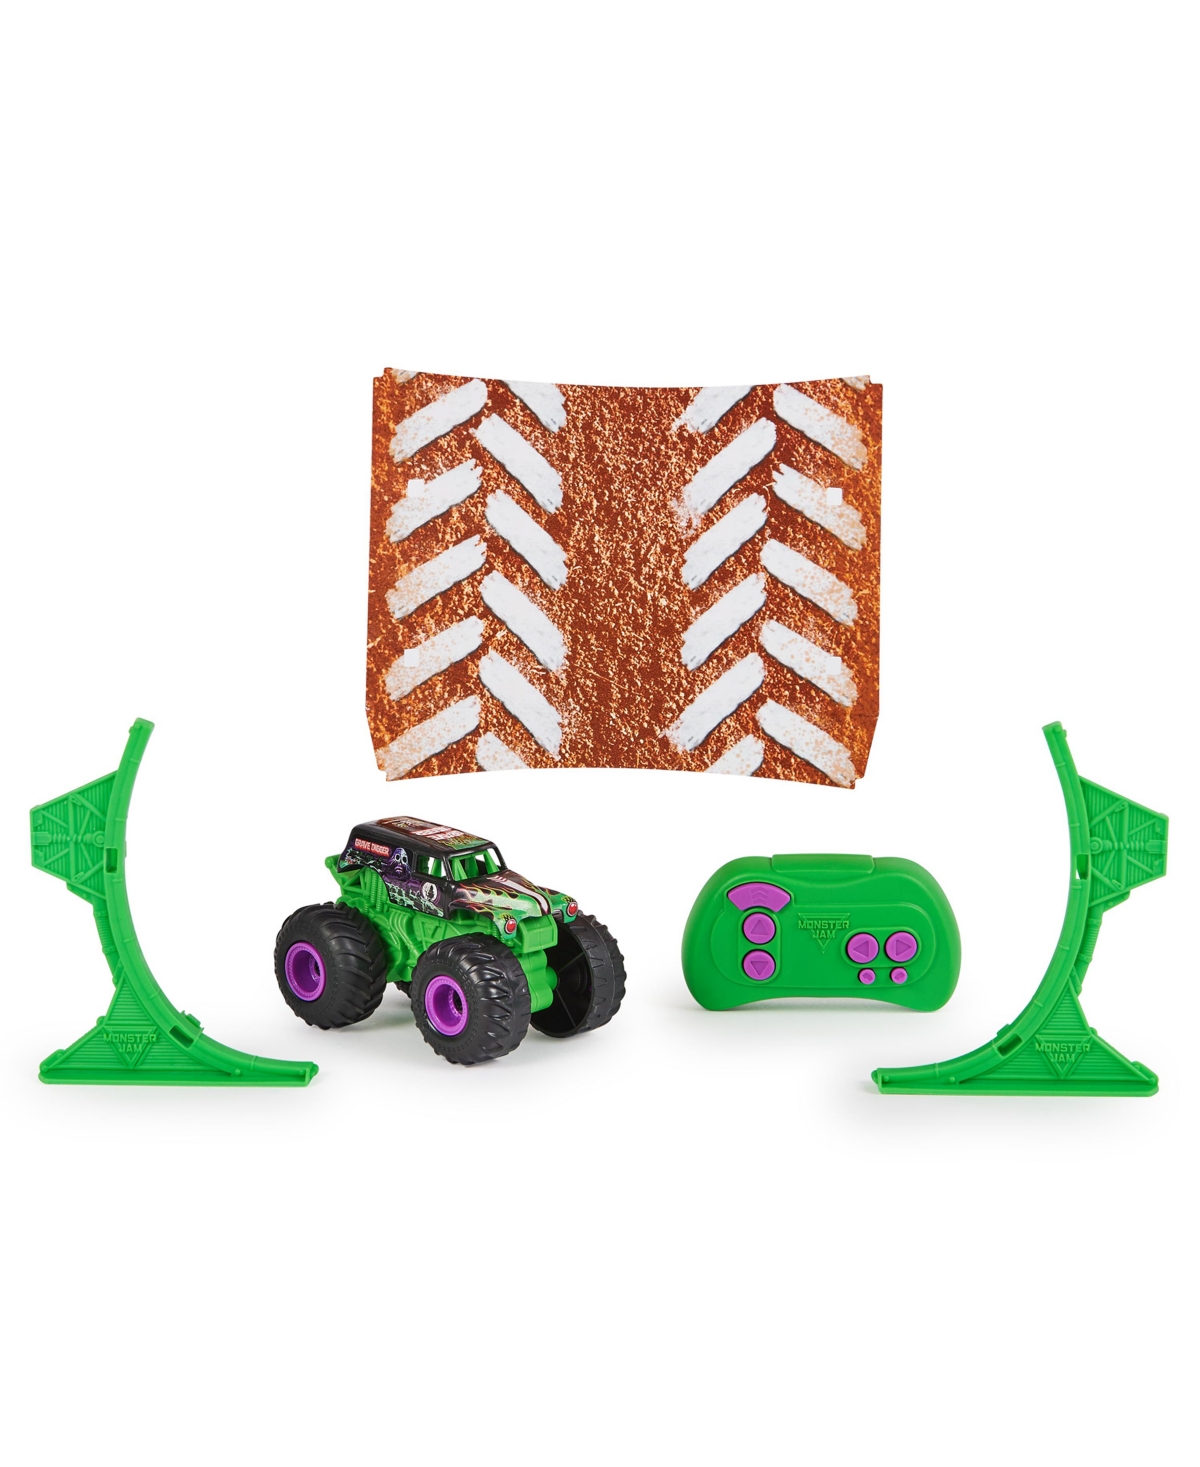 Monster Jam Kids' , Grave Digger Remote Control Monster Truck 1:64 Scale, Includes Ramp, Rc Cars In Multi-color